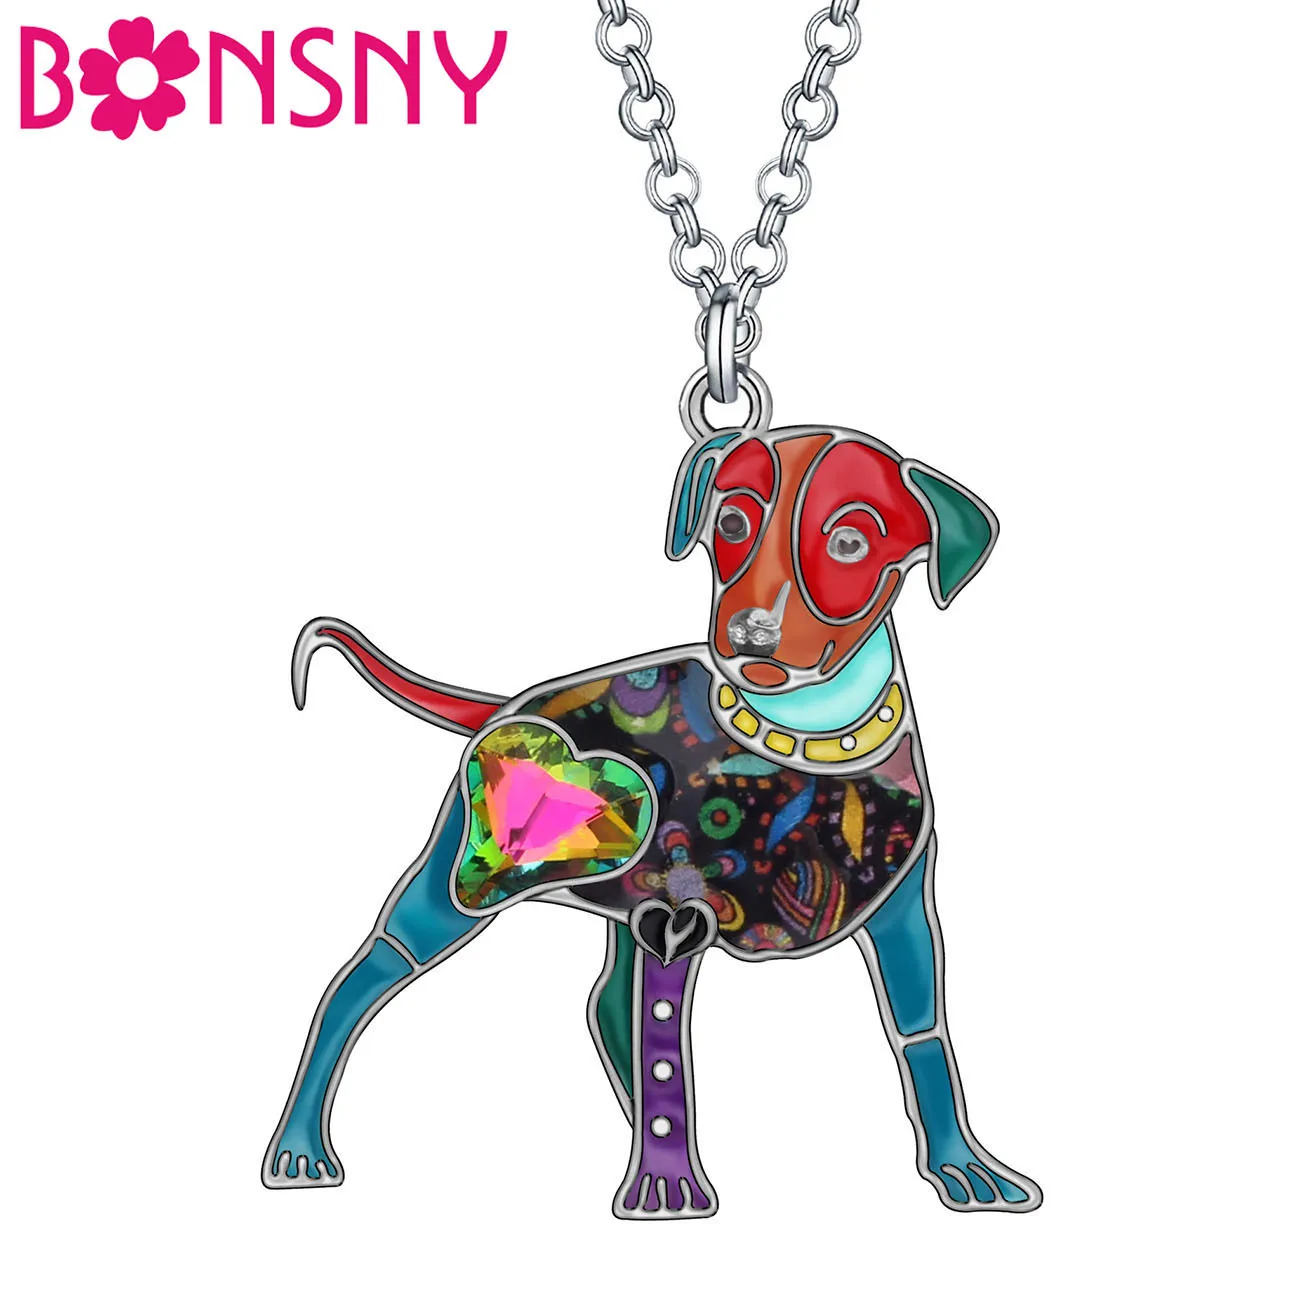 

BONSNY Rhinestone Crystal Enamel Alloy Floral Doberman Dogs Necklace Pendant Fashion Pets Jewelry For Women Girl Teens Gifts